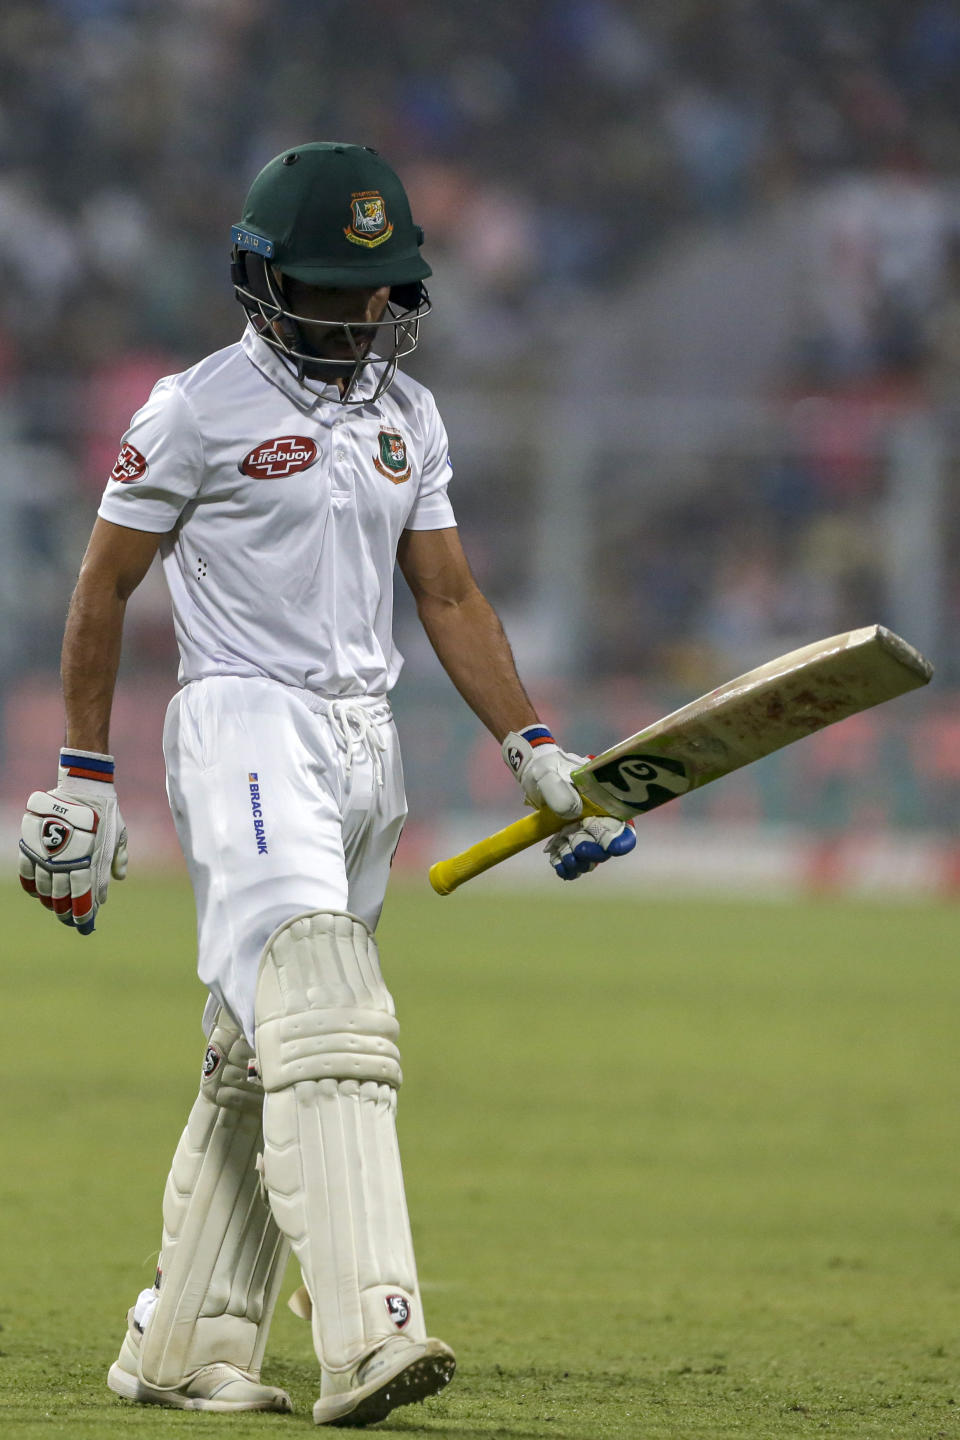 Bangladesh's captain Mominul Haque walks back to the pavilion after being dismissed during the second day of the second test cricket match between India and Bangladesh, in Kolkata, India, Saturday, Nov. 23, 2019. (AP Photo/Bikas Das)